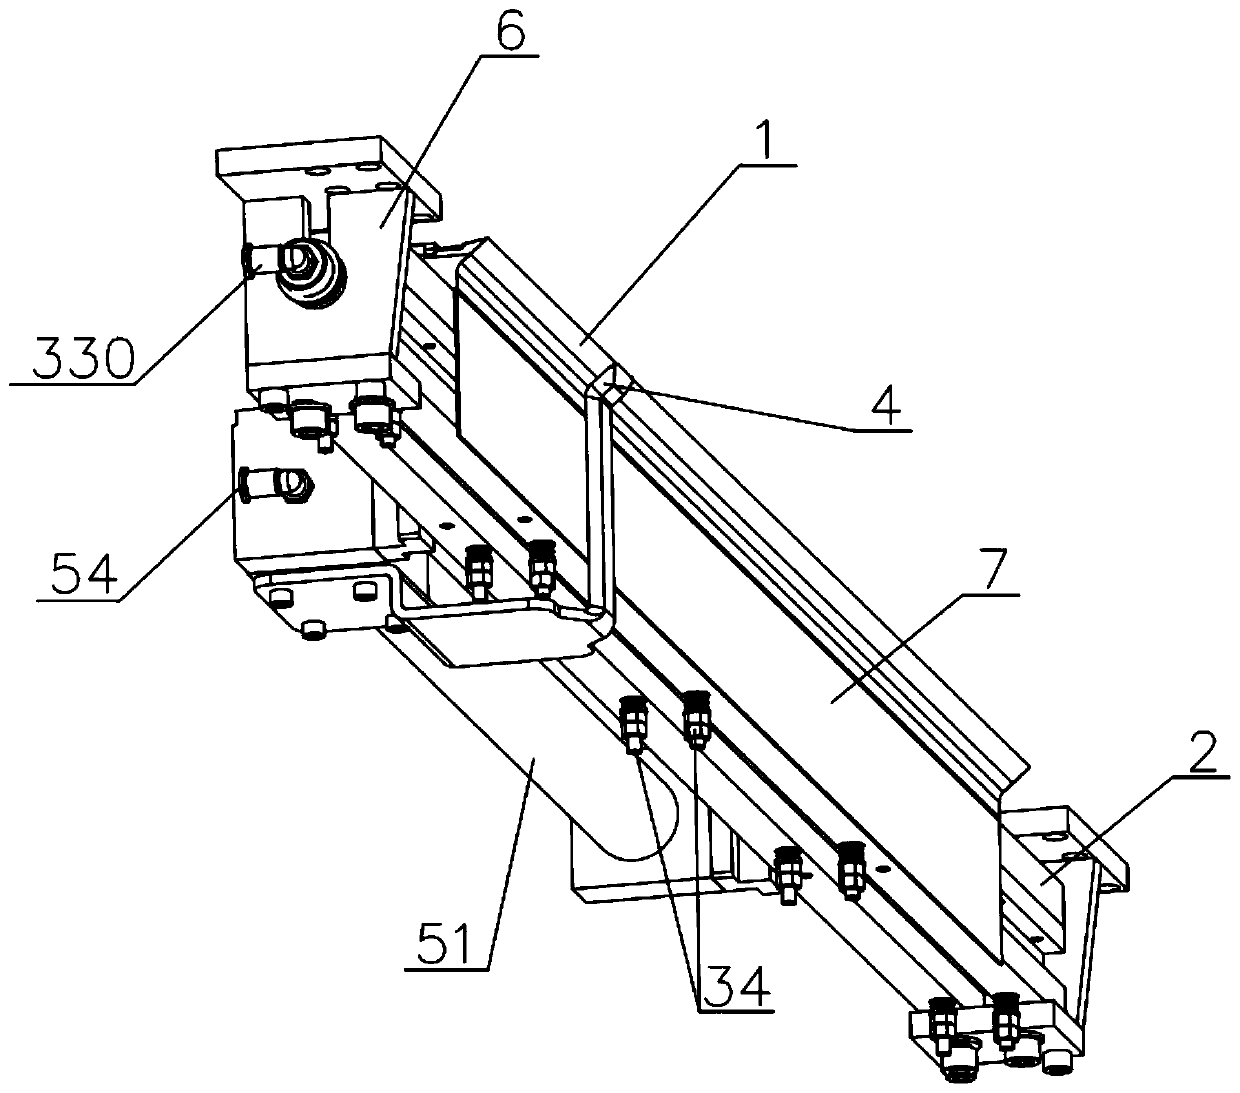 Lifting scraper device capable of automatically clearing material sticking to scraper edge